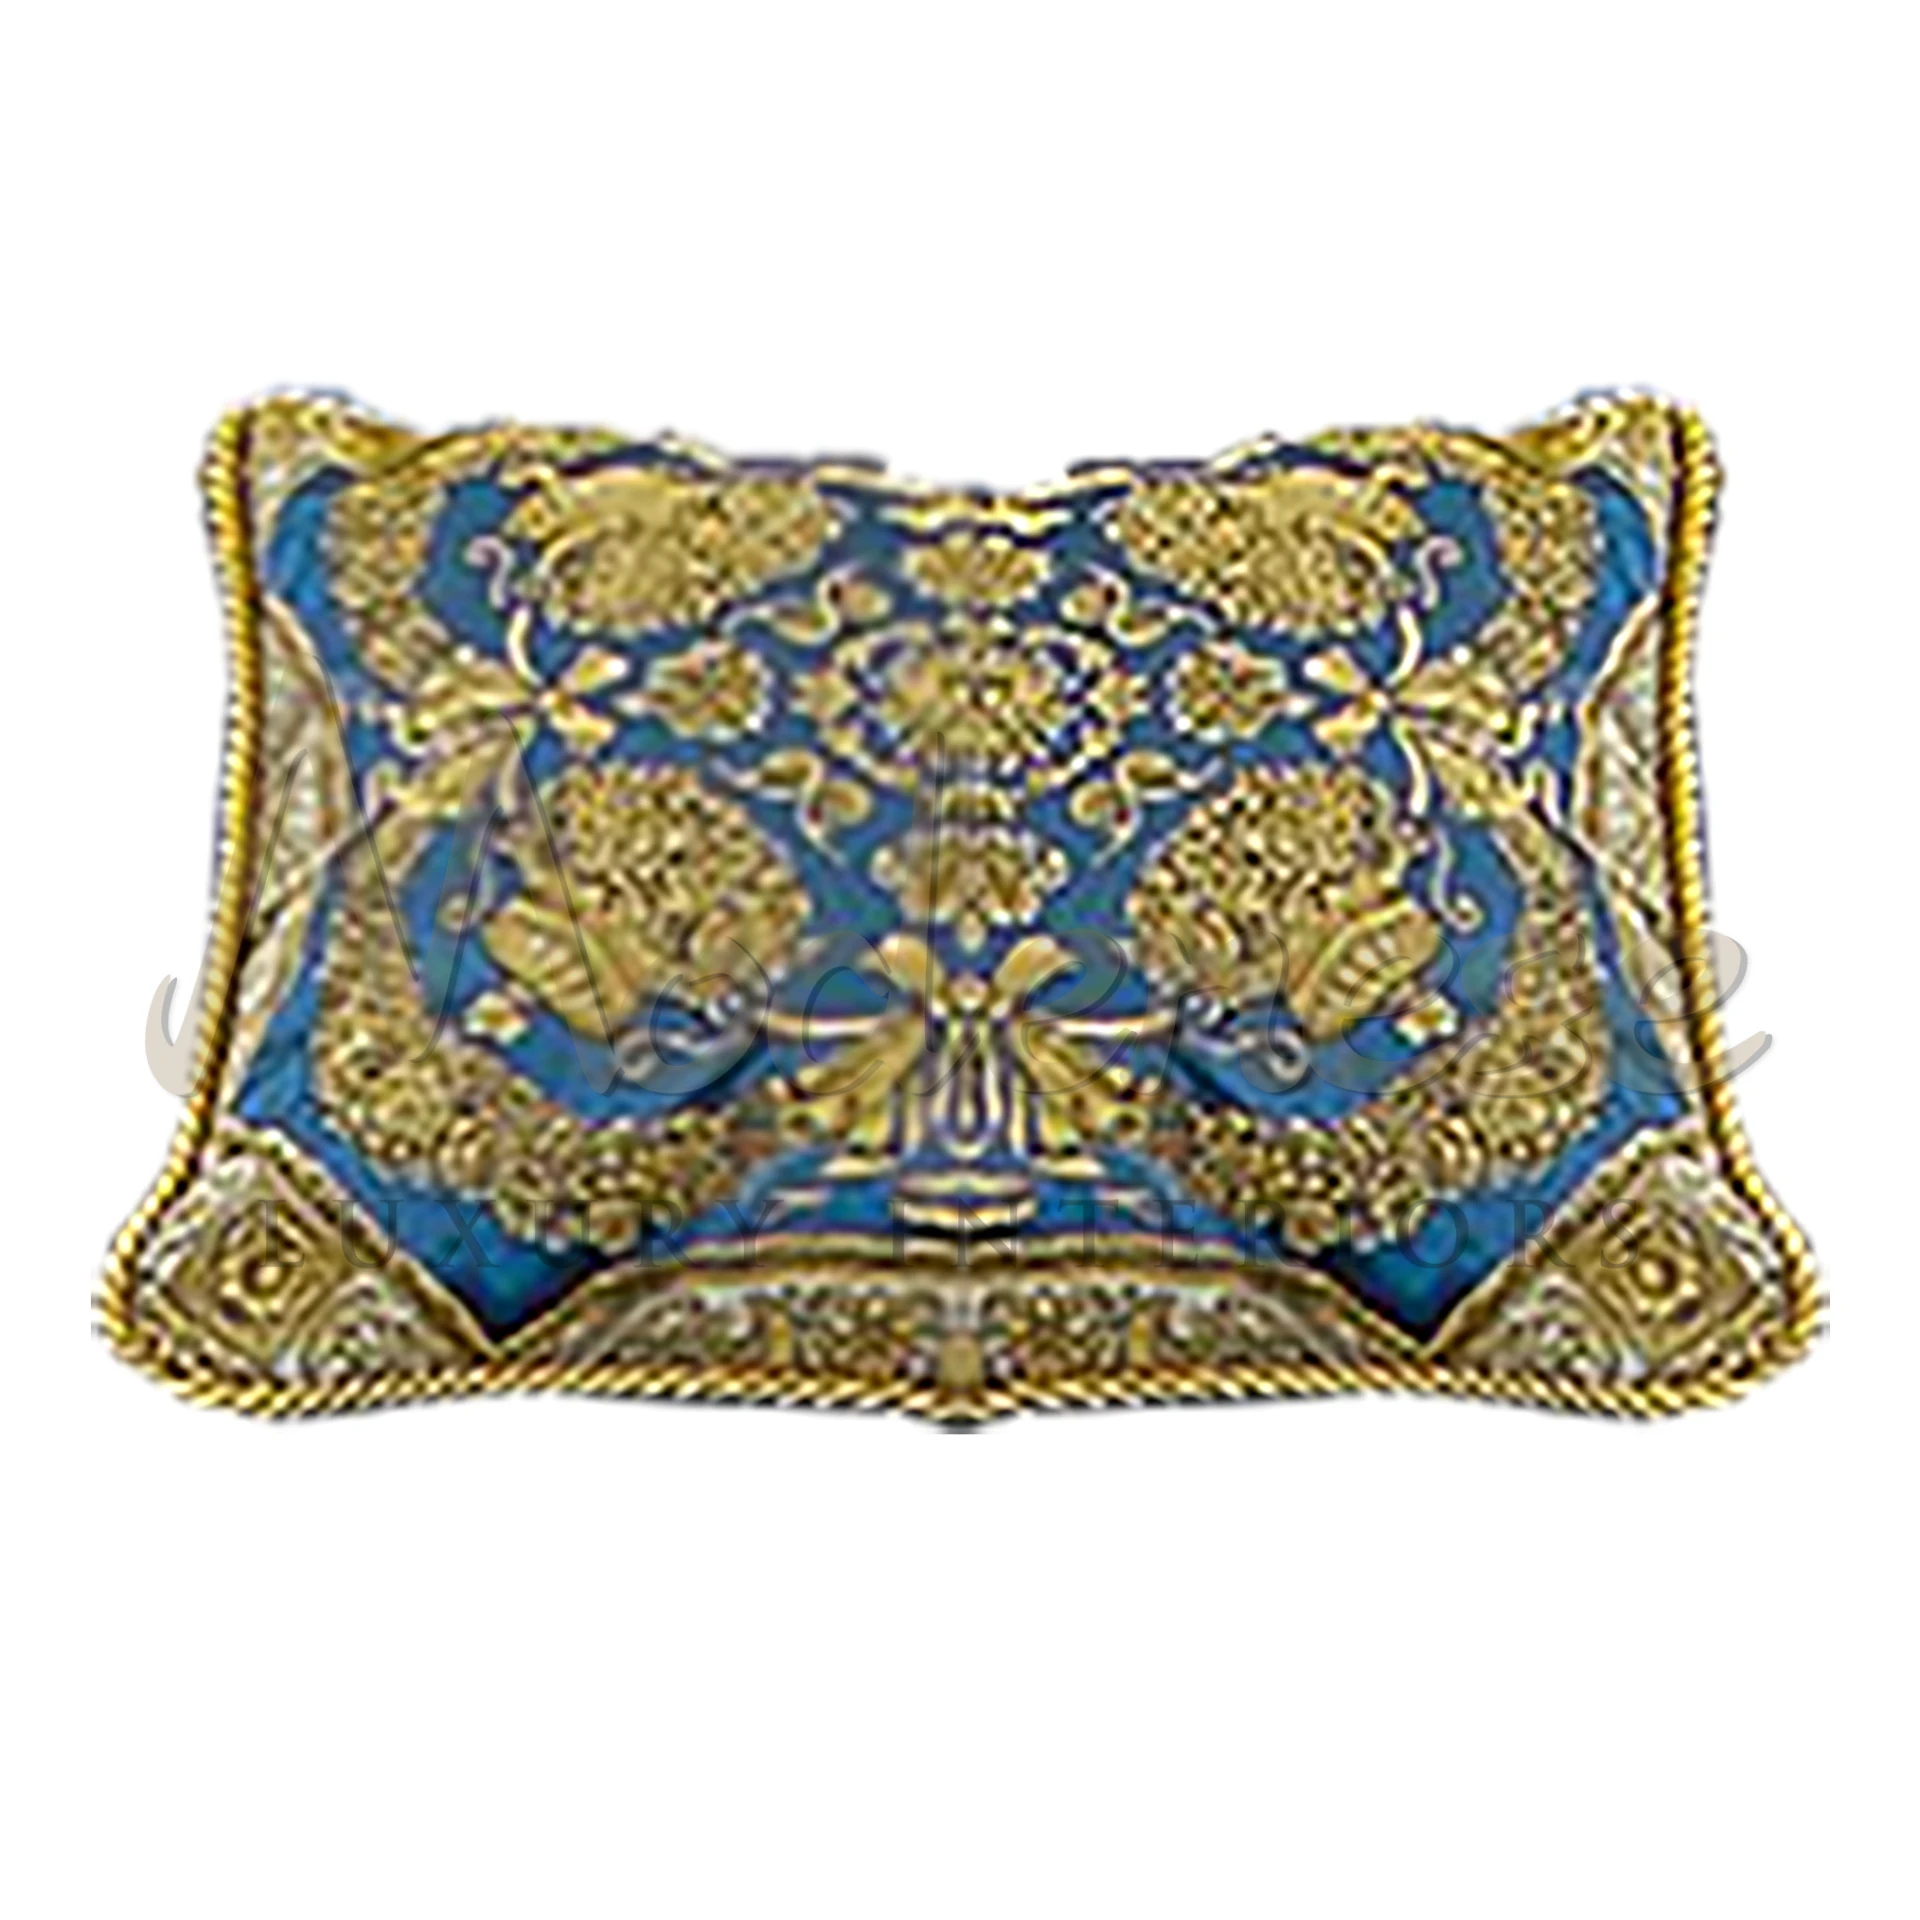 Classical Royal Blue Pillow in various shapes and sizes, offering versatility and luxury in Italian textile craftsmanship.